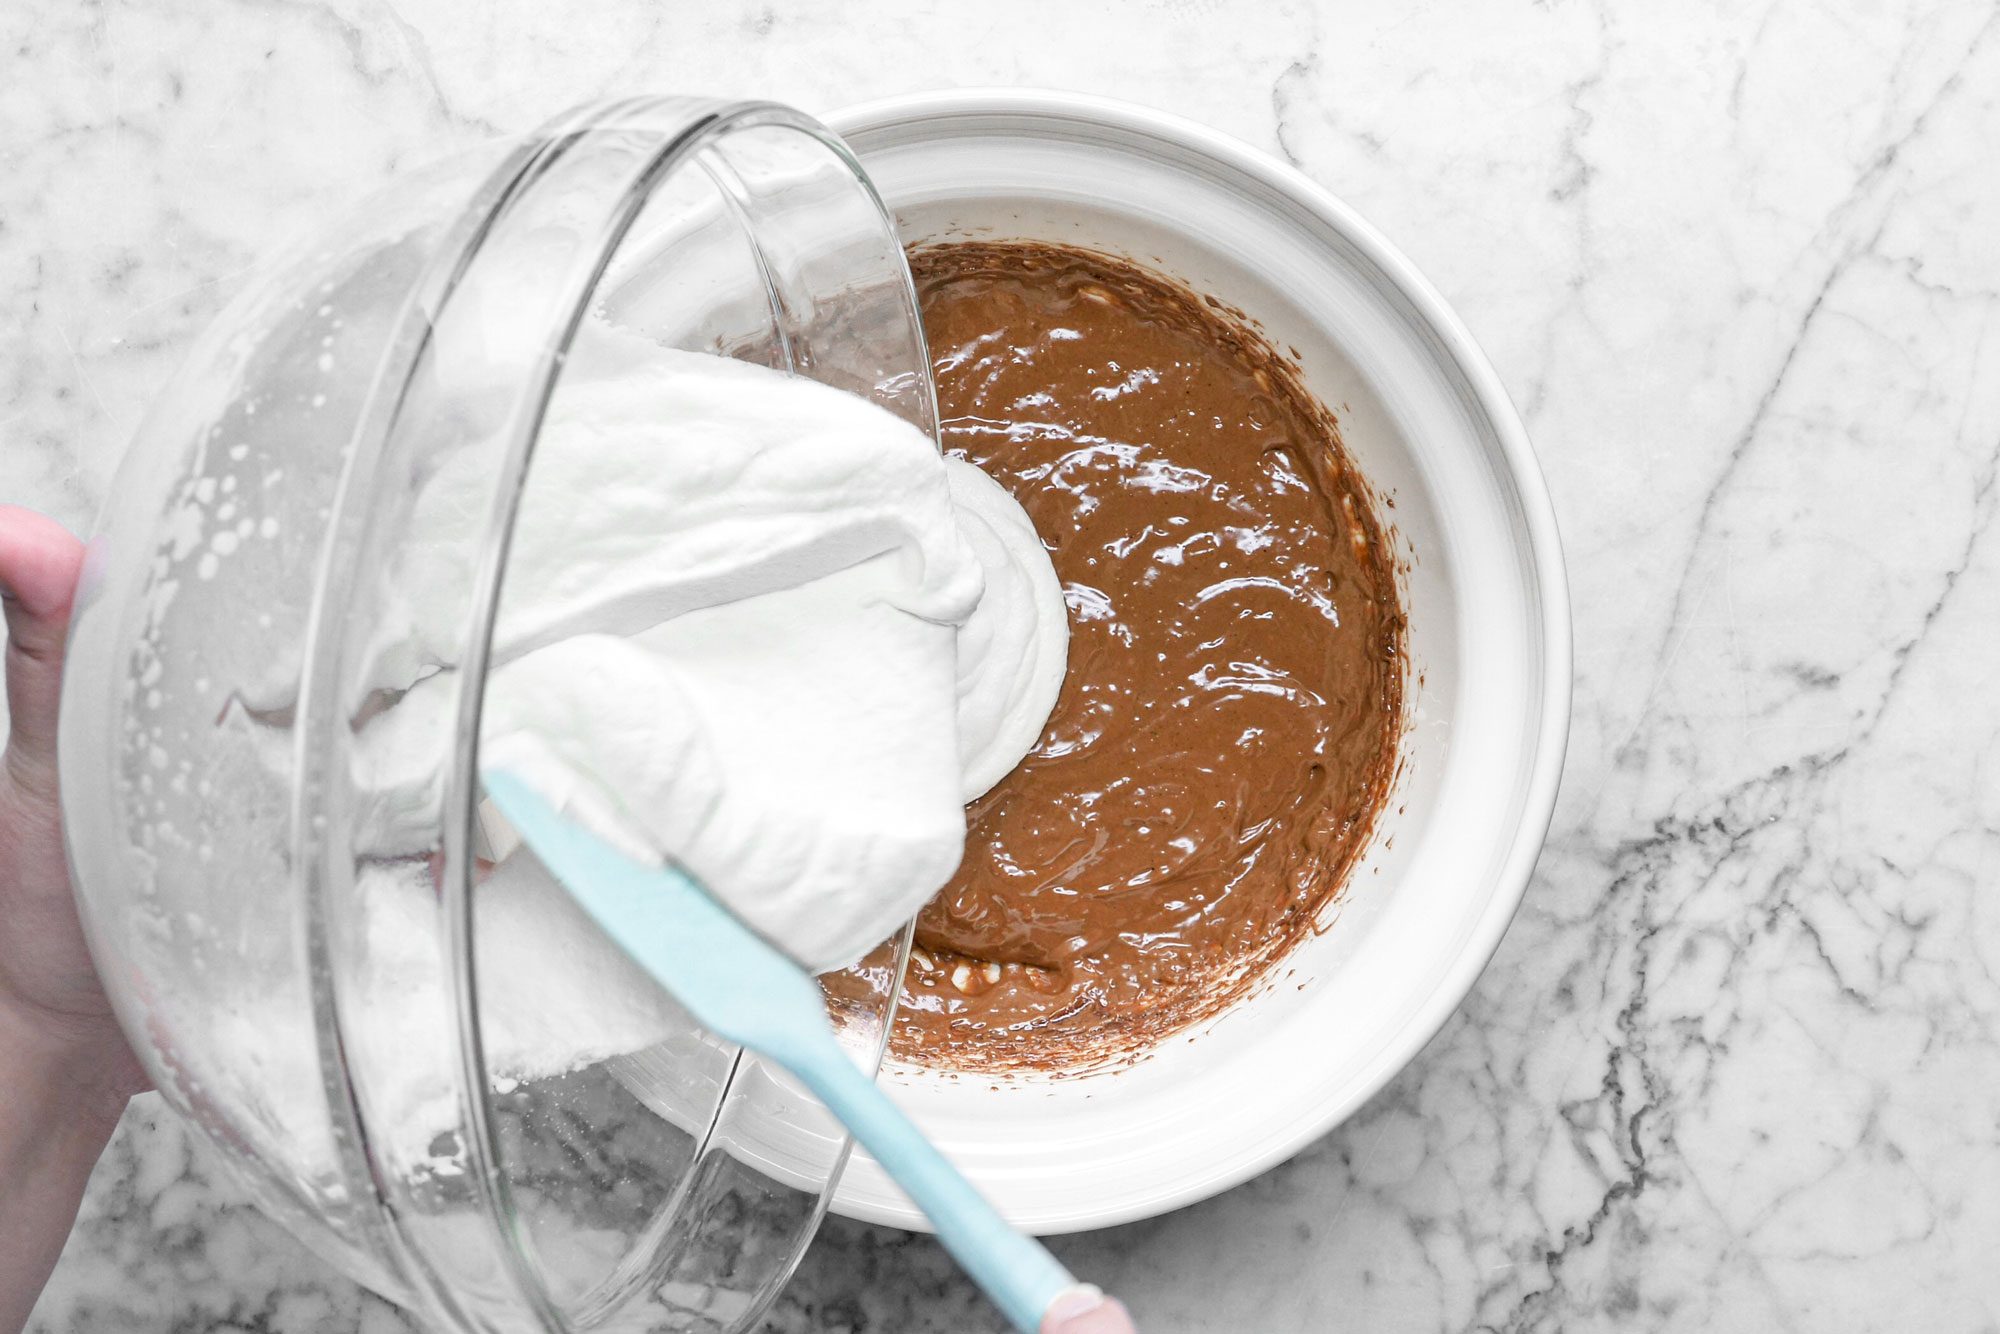 pouring whipped cream into a bowl of chocolate mixture, marble background